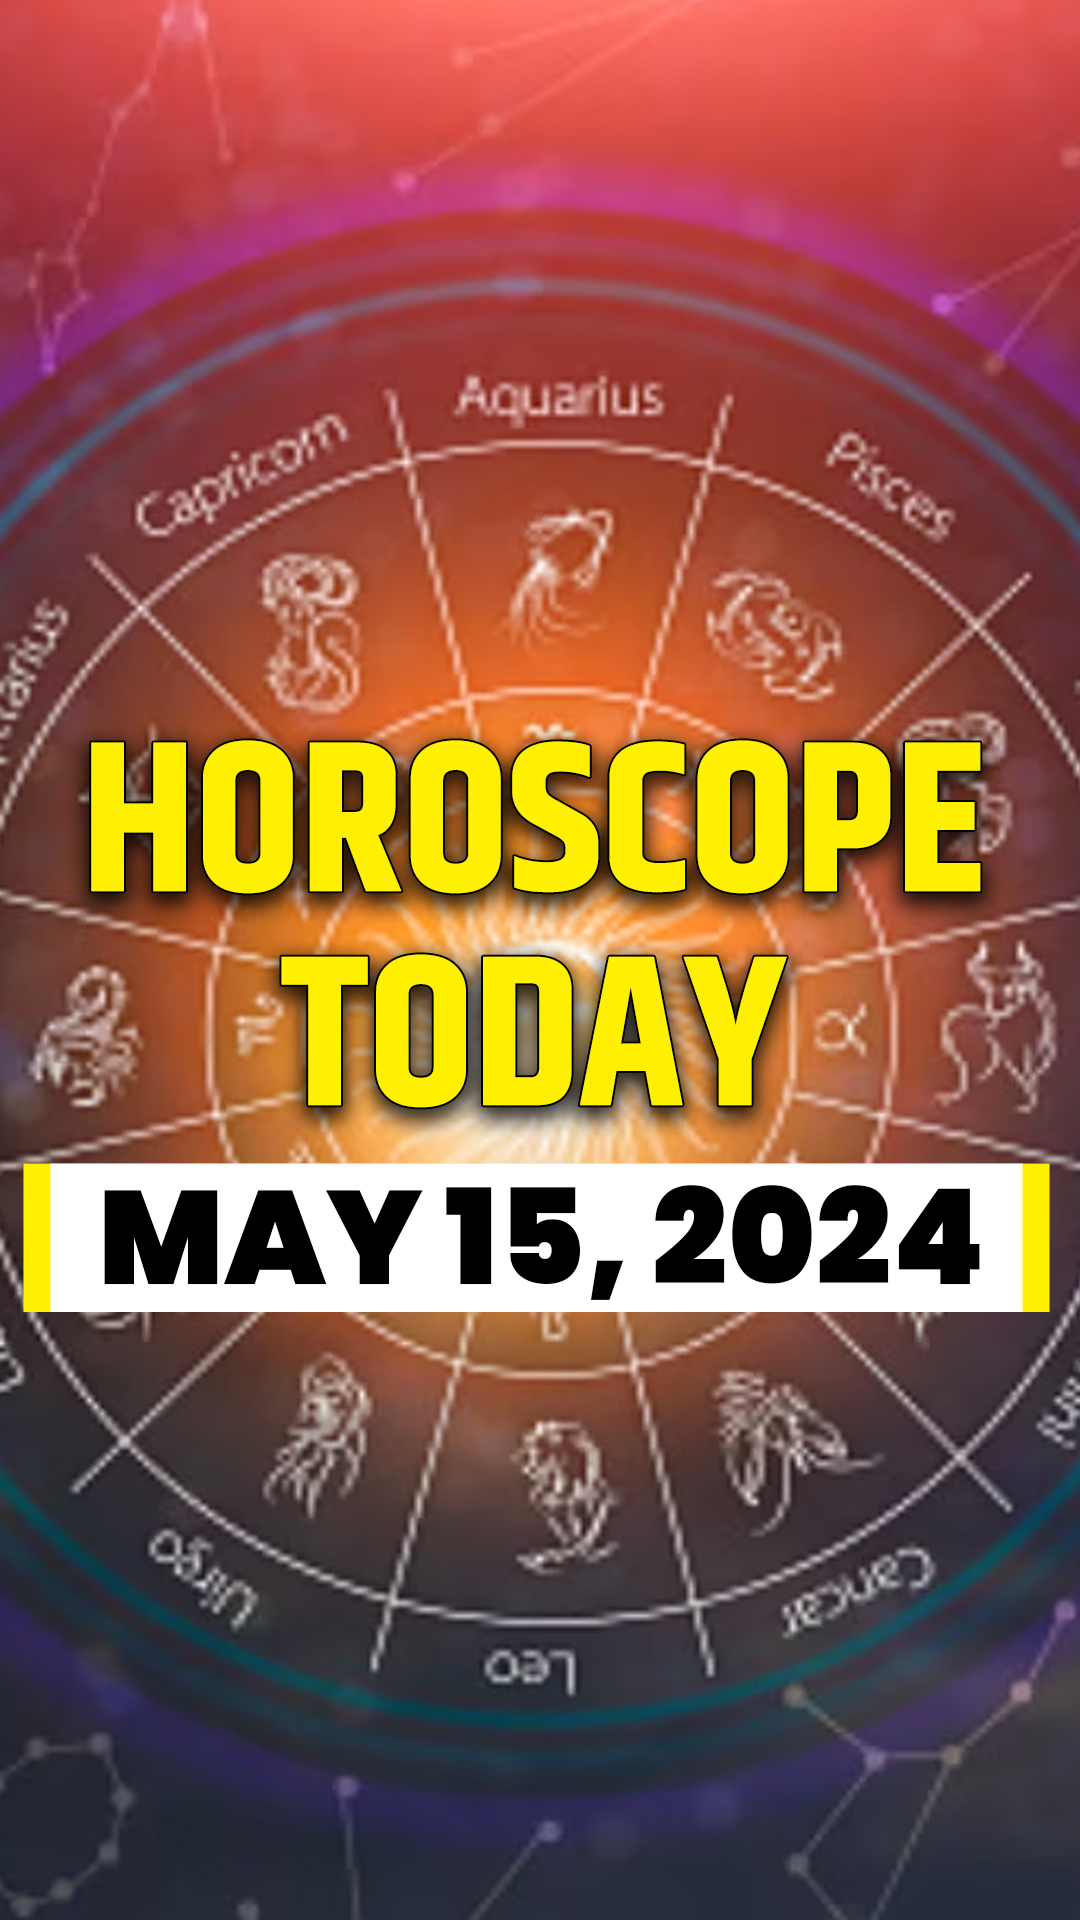 Know Lucky number and colour for all zodiac signs in your horoscope for May 15, 2024